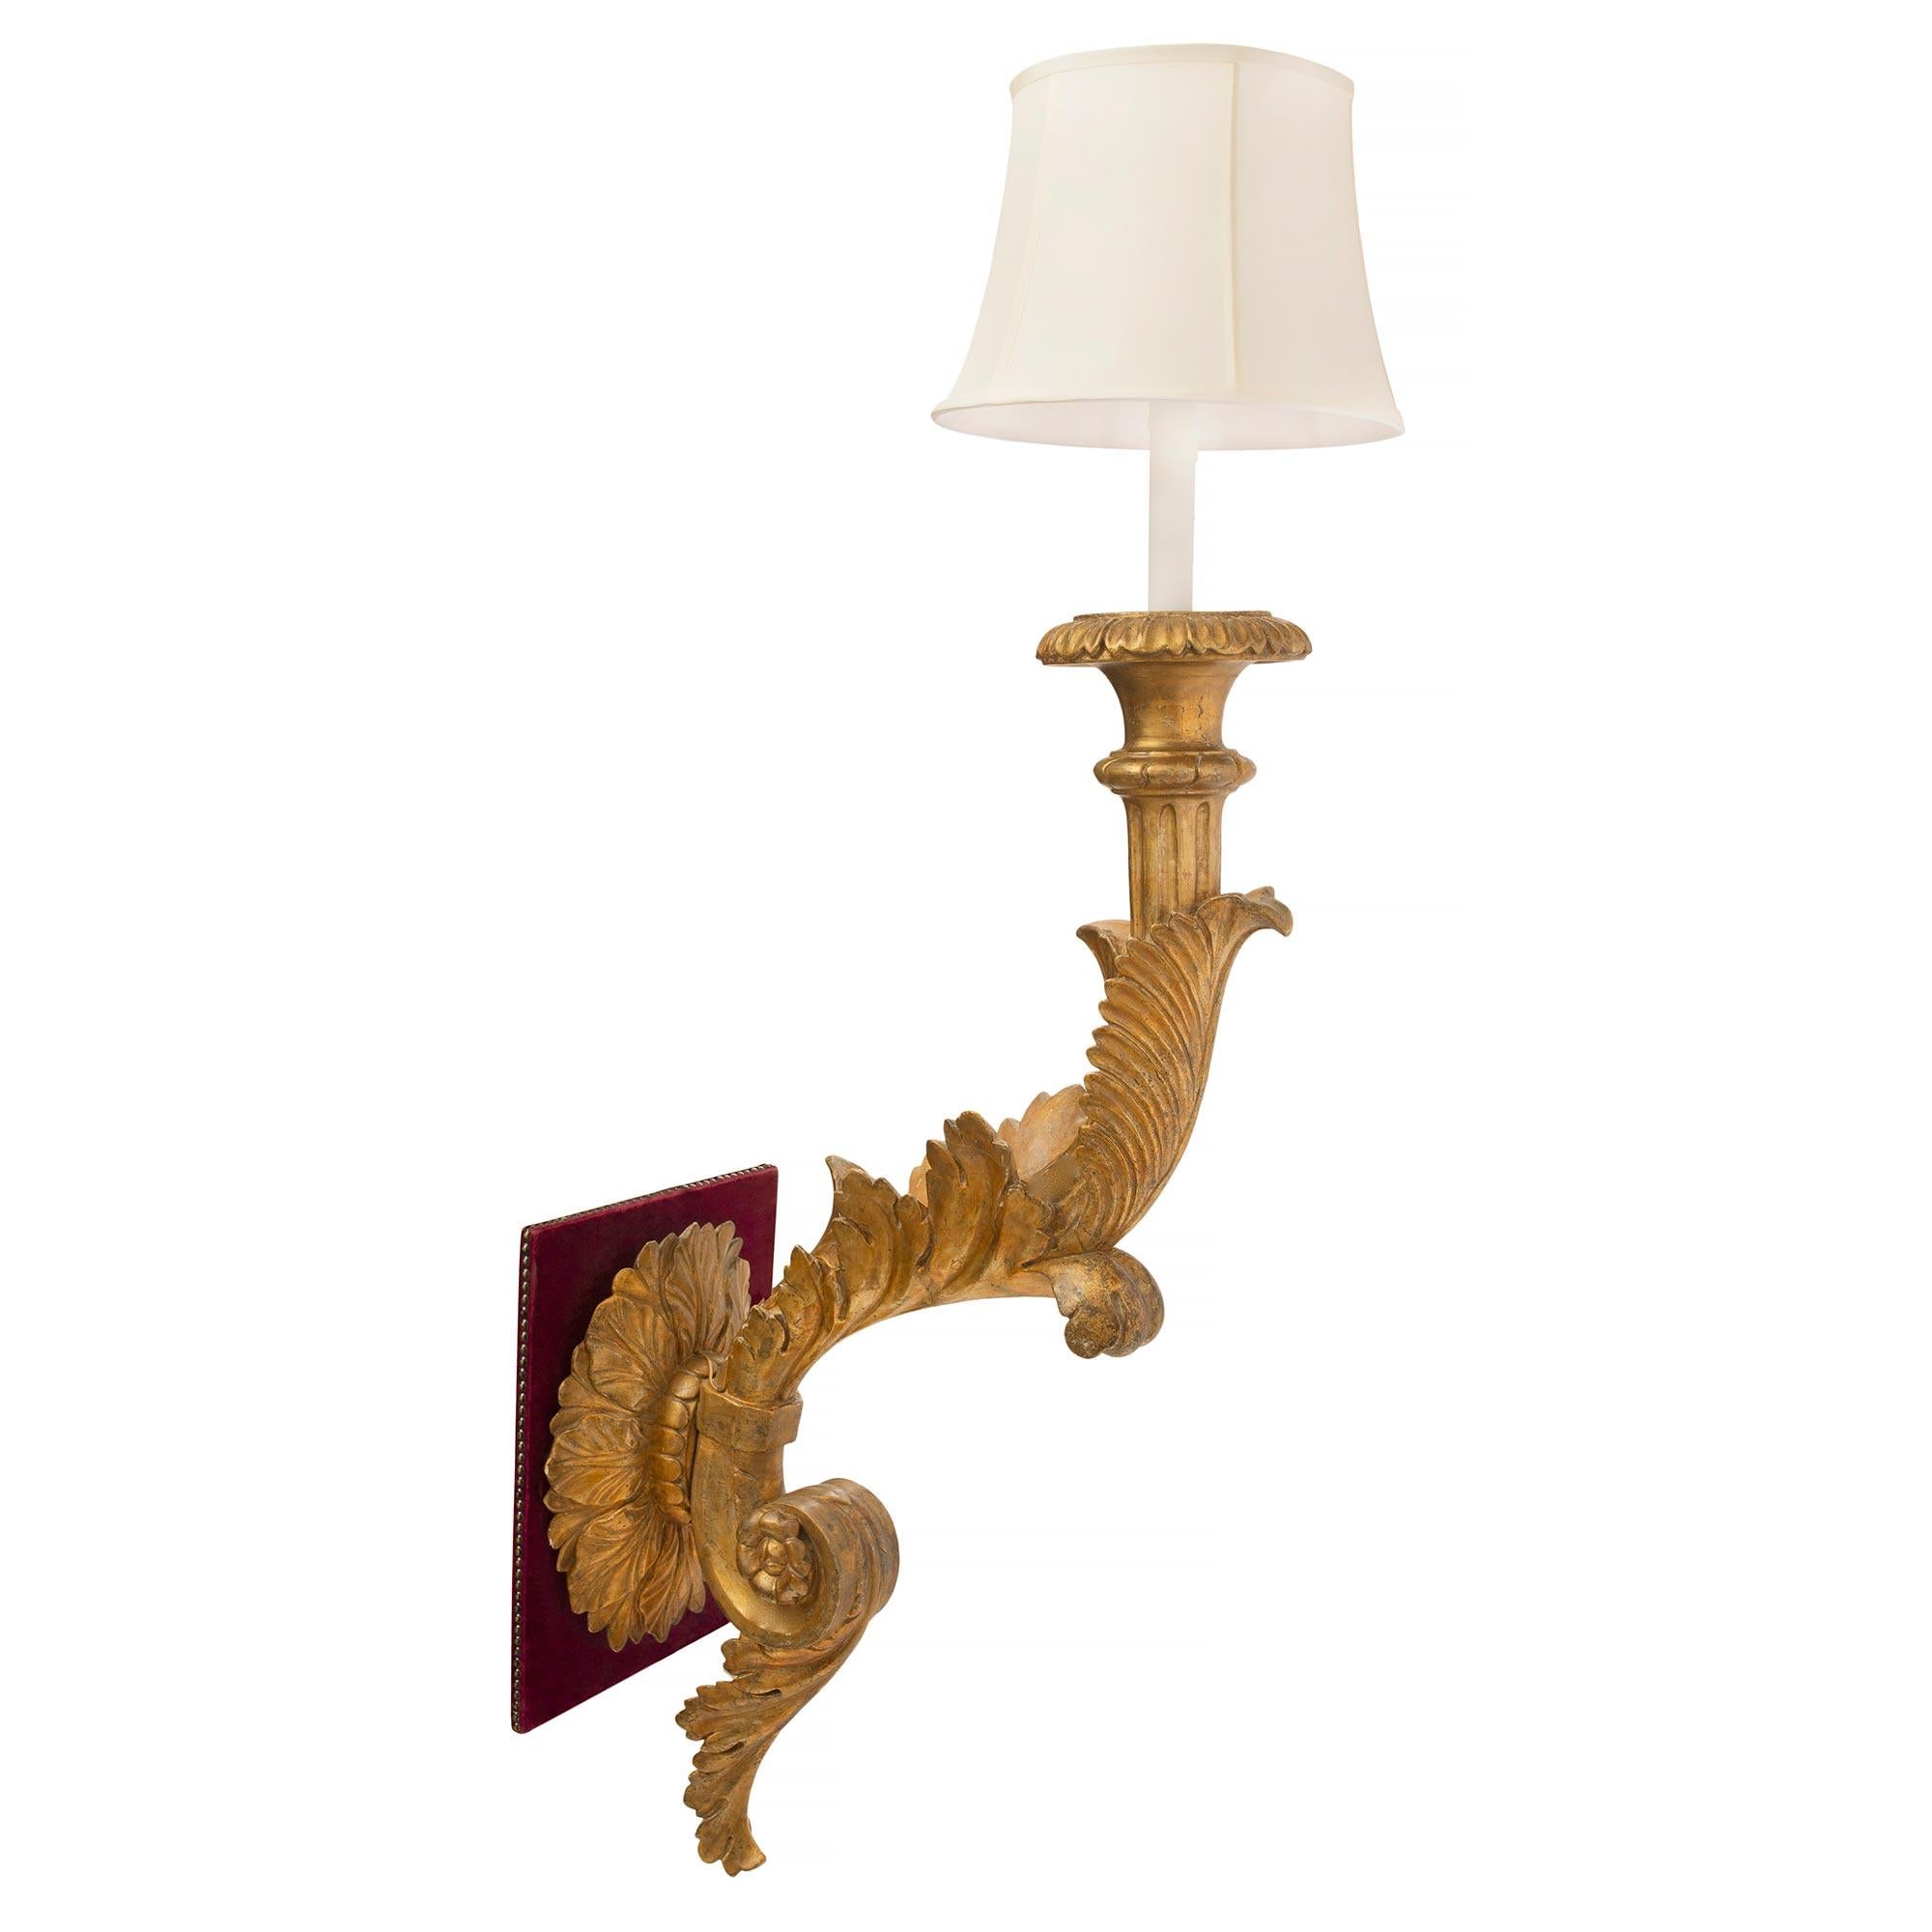 A handsome and large scale set of four Italian 18th century Louis XVI period giltwood electrified Bras de Lumière sconces. Each unique sconce is centered by an elegant and most decorative red velvet back plate finished with French nail heads and a